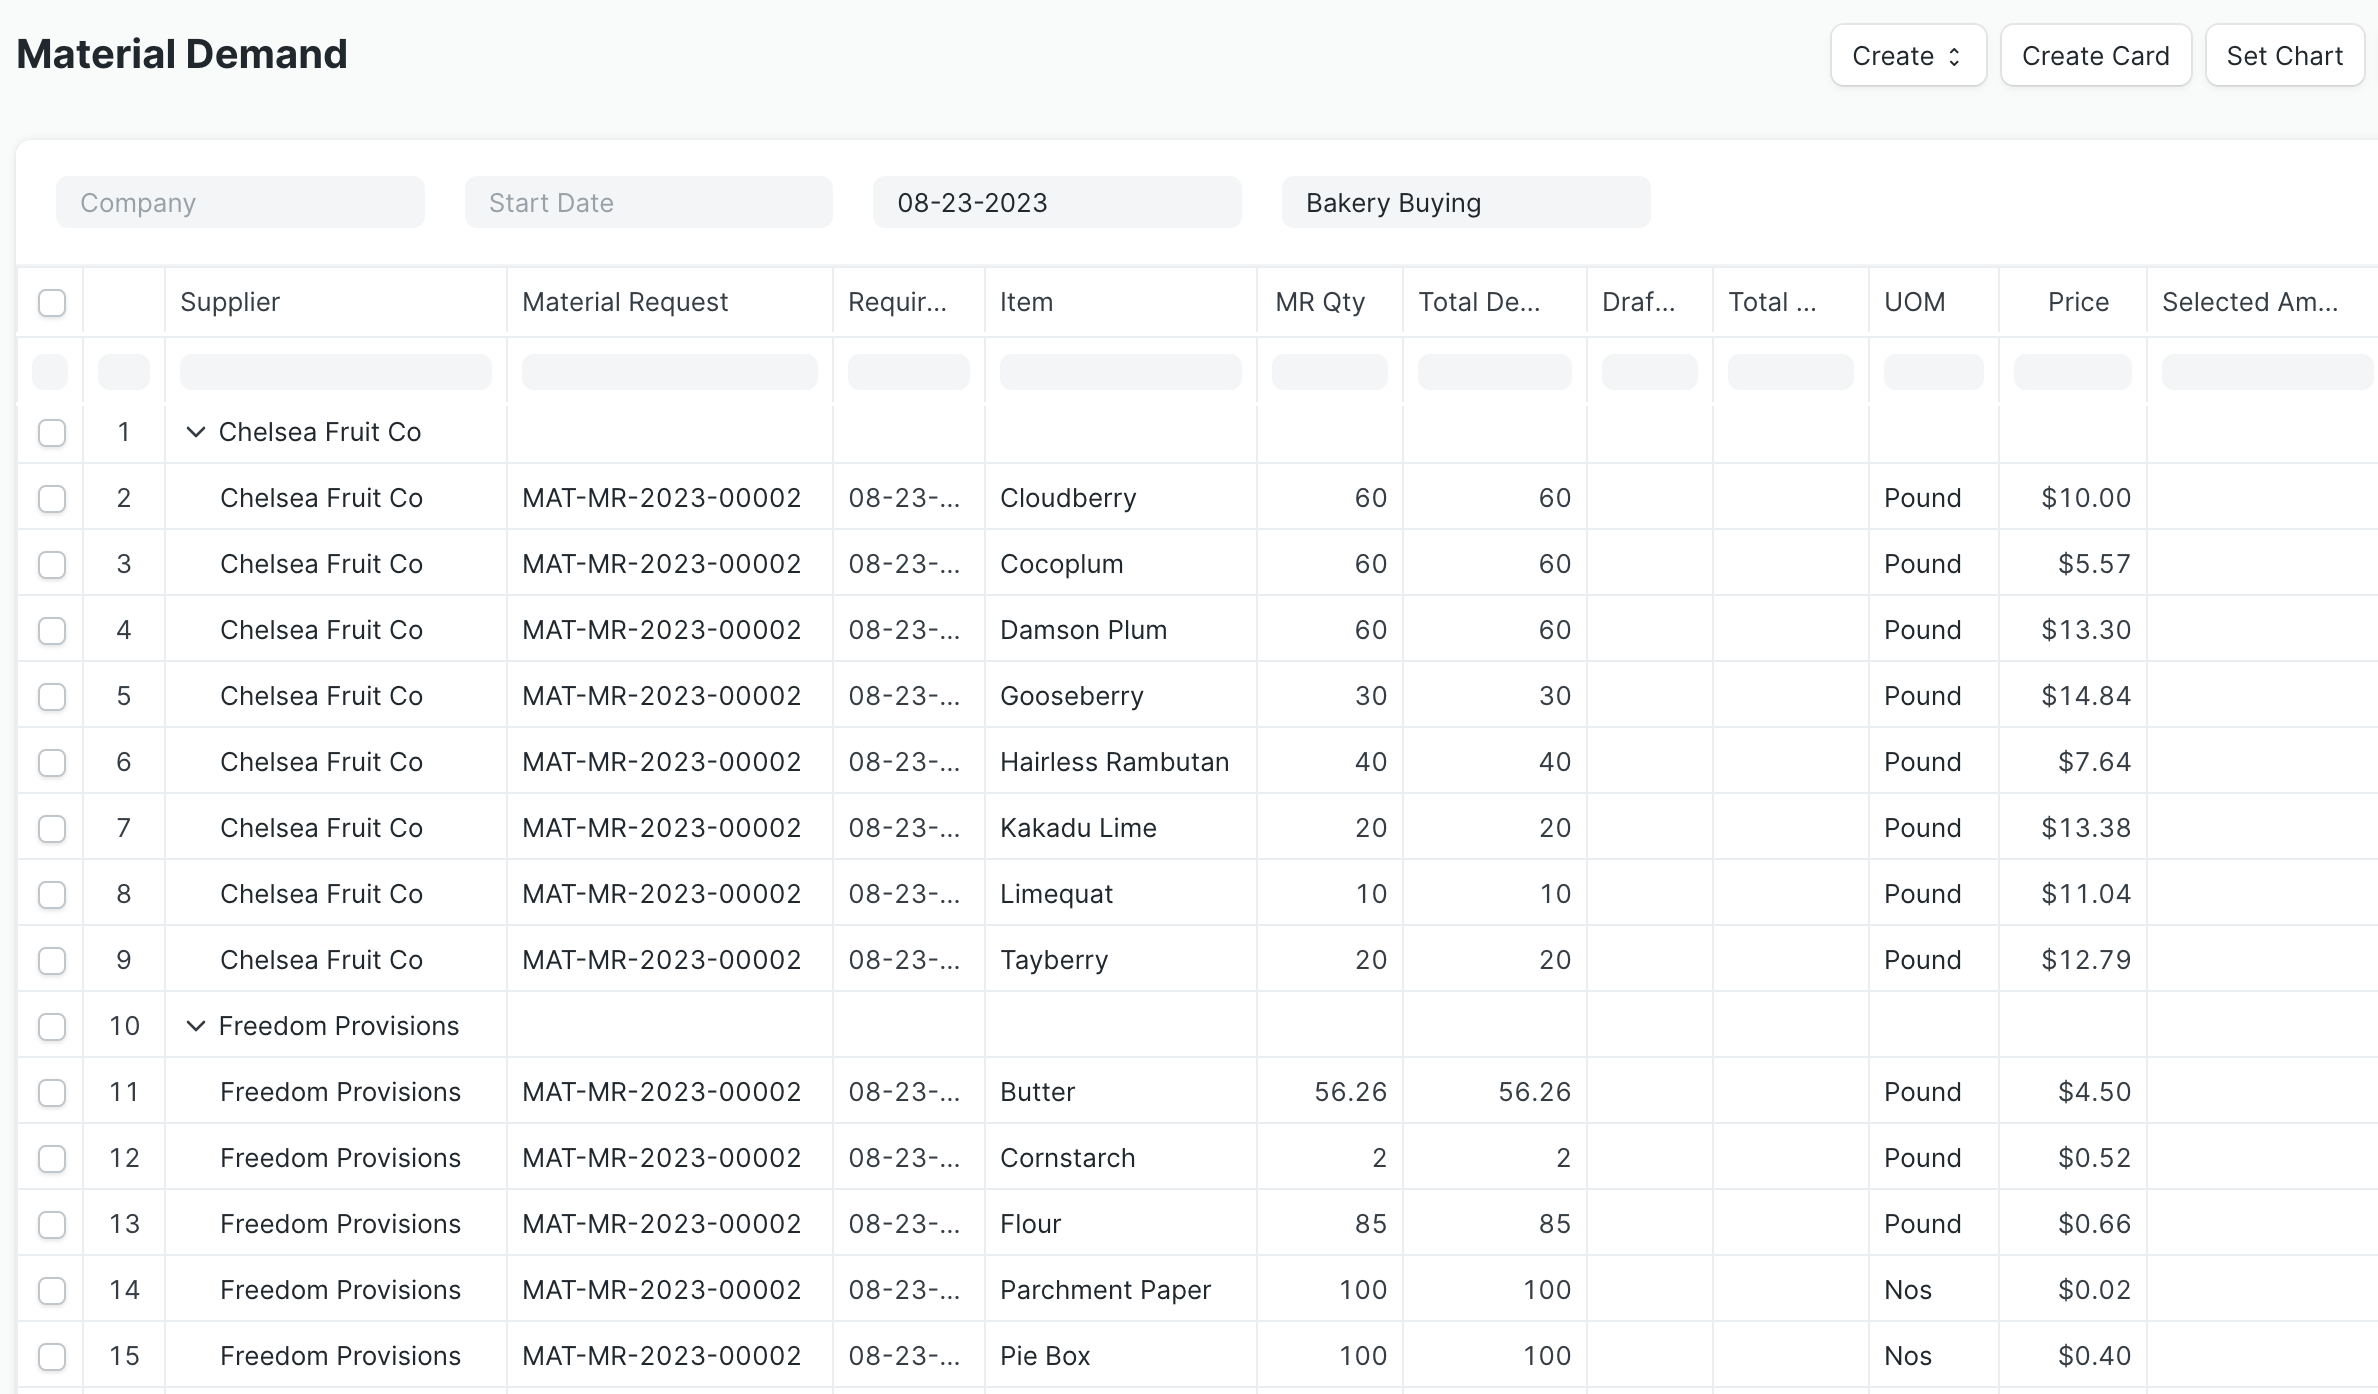 Screen shot of the Material Demand report showing rows of Items grouped by supplier with columns for the Supplier, Material Request document ID, Required By date, Item, MR Qty, Draft POs, Total Selected, UOM, Price, and Selected Amount